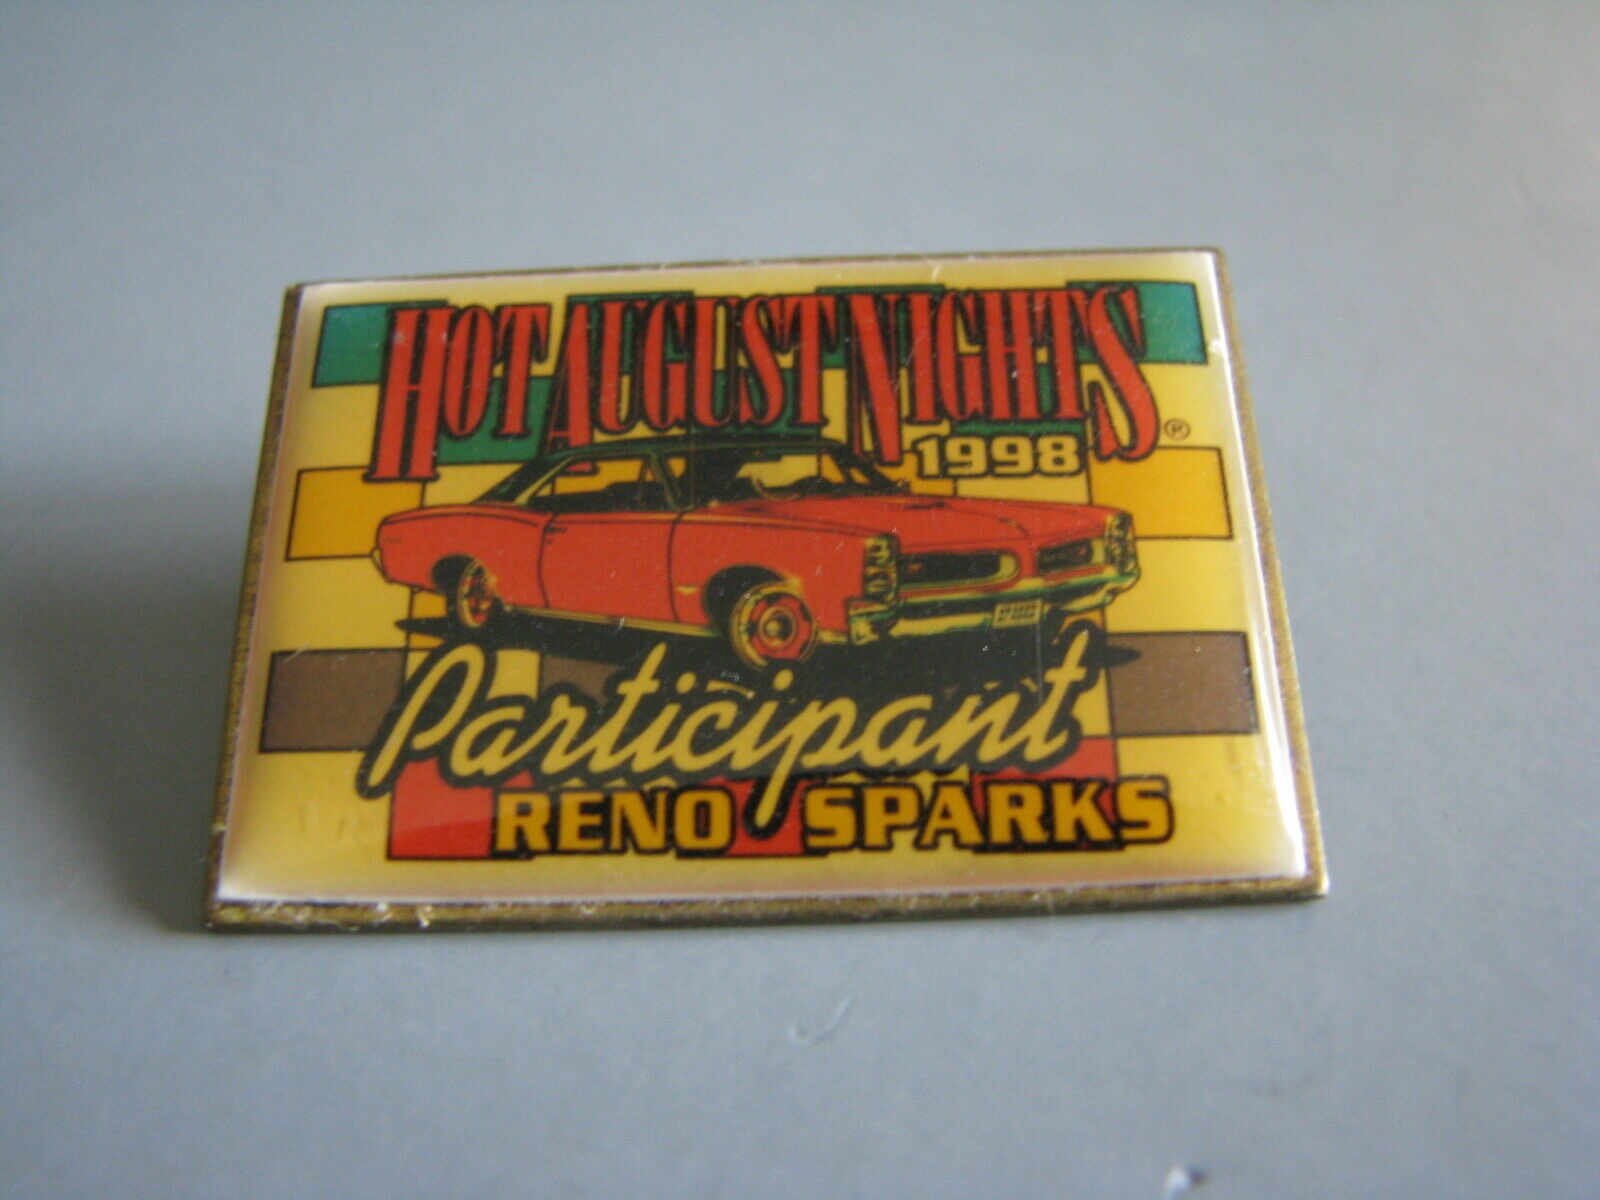 1998 Hot August Nights Car Show Participant Reno Nevada Automotive Hat Pin